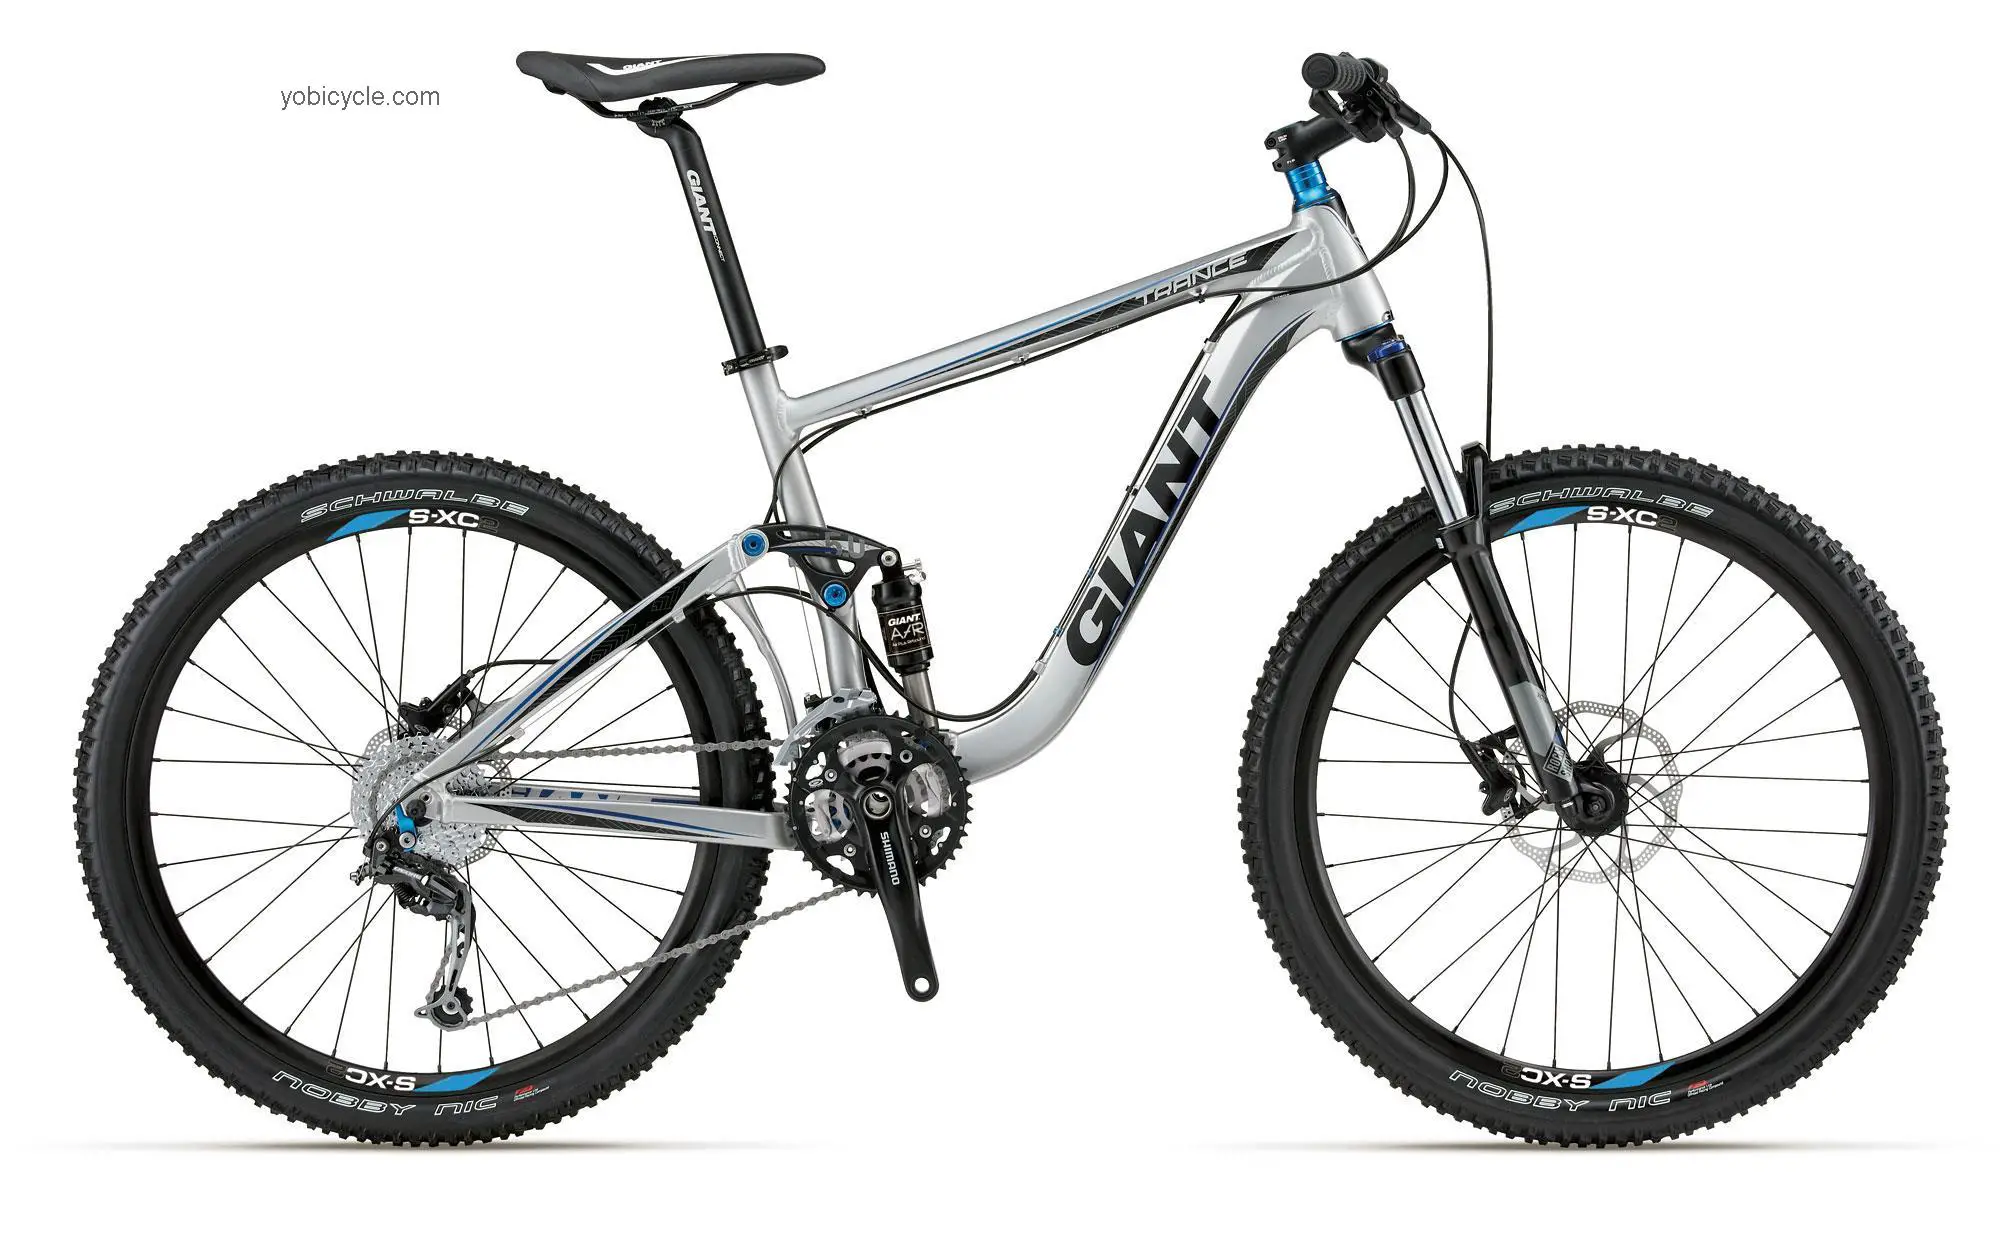 Giant Trance X 4 2012 comparison online with competitors